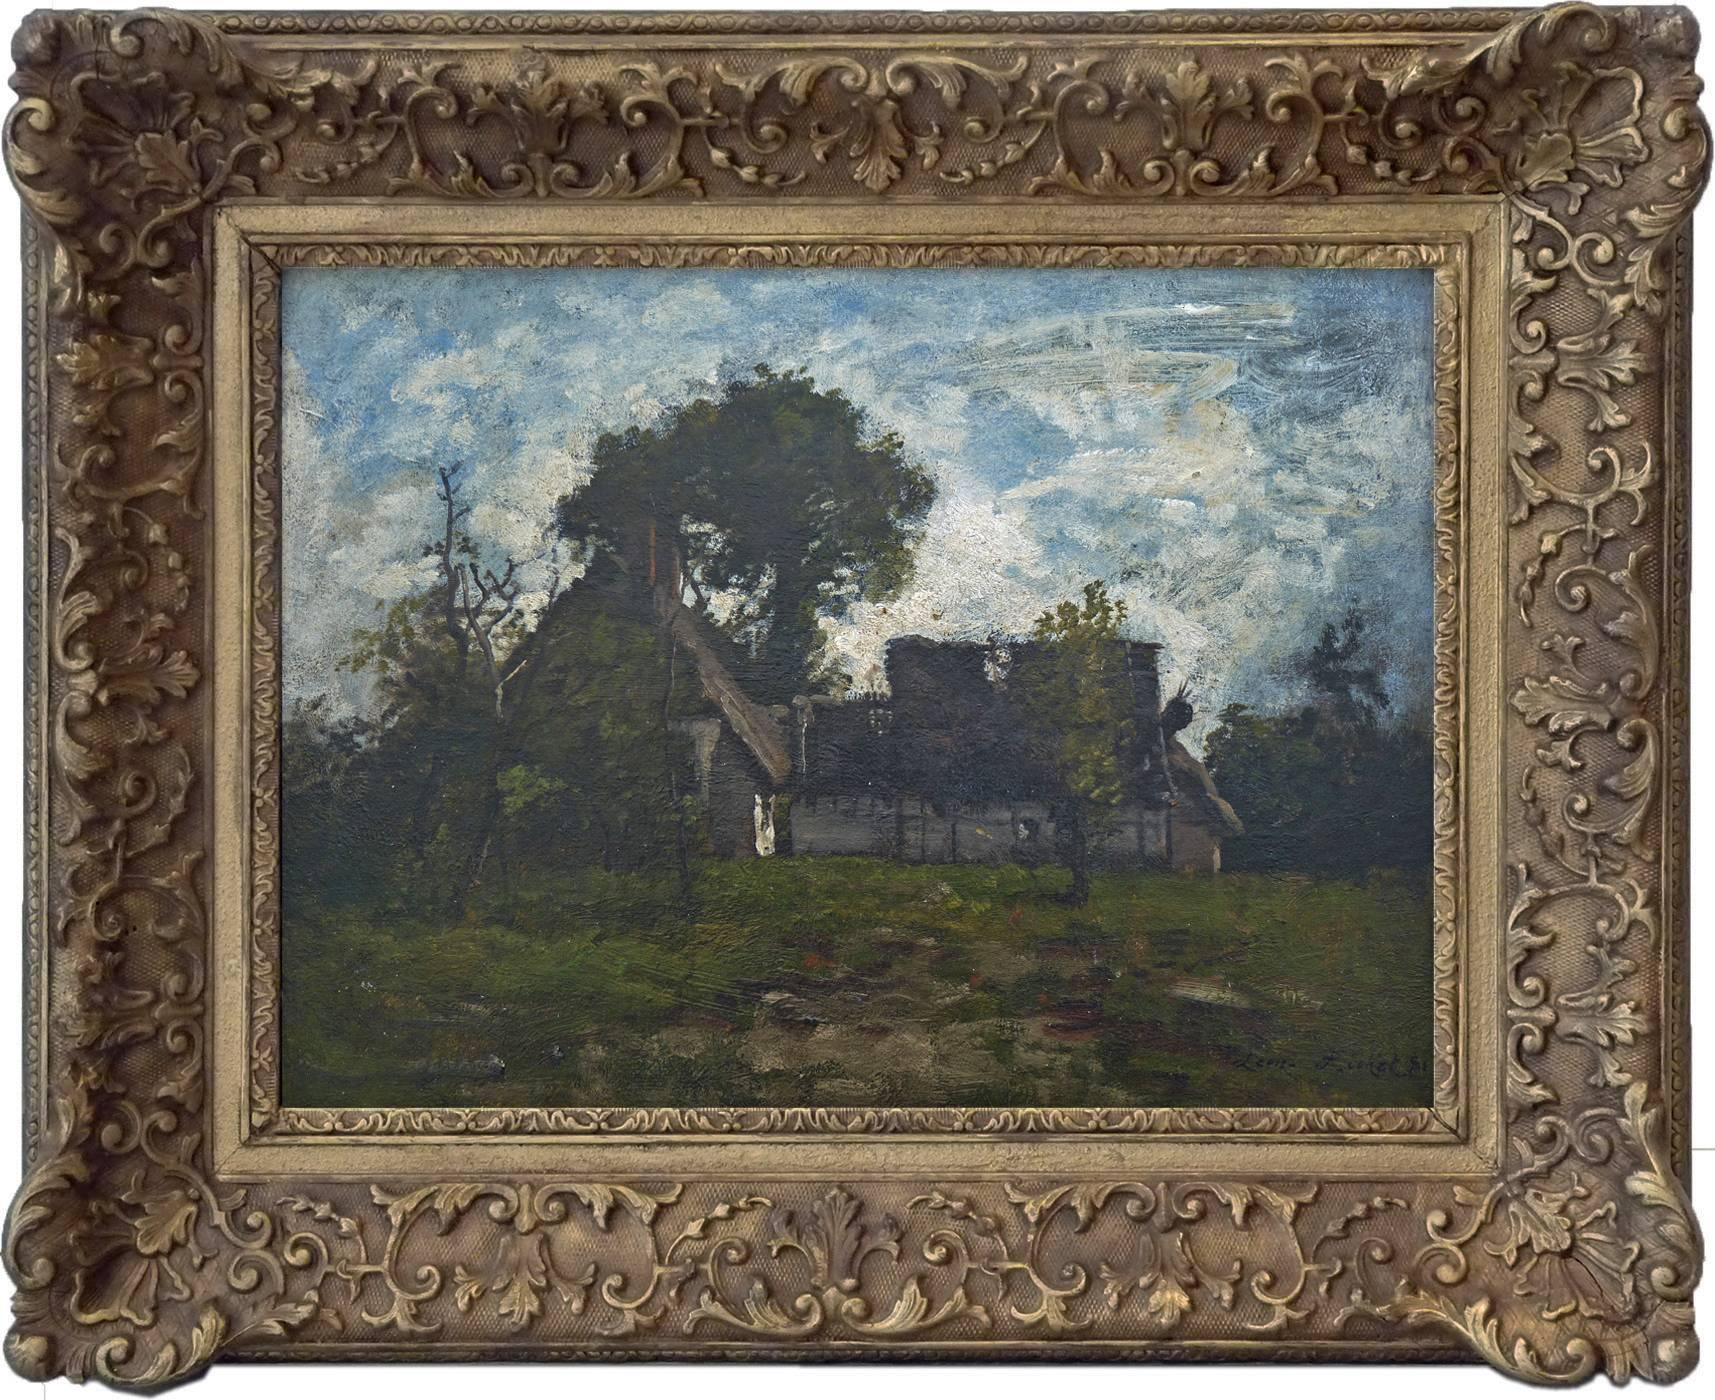 Oil on cardboard, 10.63 x 14.57 in. (27 x 37 cm)
Signed lower right and dated (18)81
Housed in a period frame, size 16.54 x 20.47 in. (42 x 52 cm)

The works of Richet particularly live from the chiaroscuro effect and the tonal color of the Barbizon